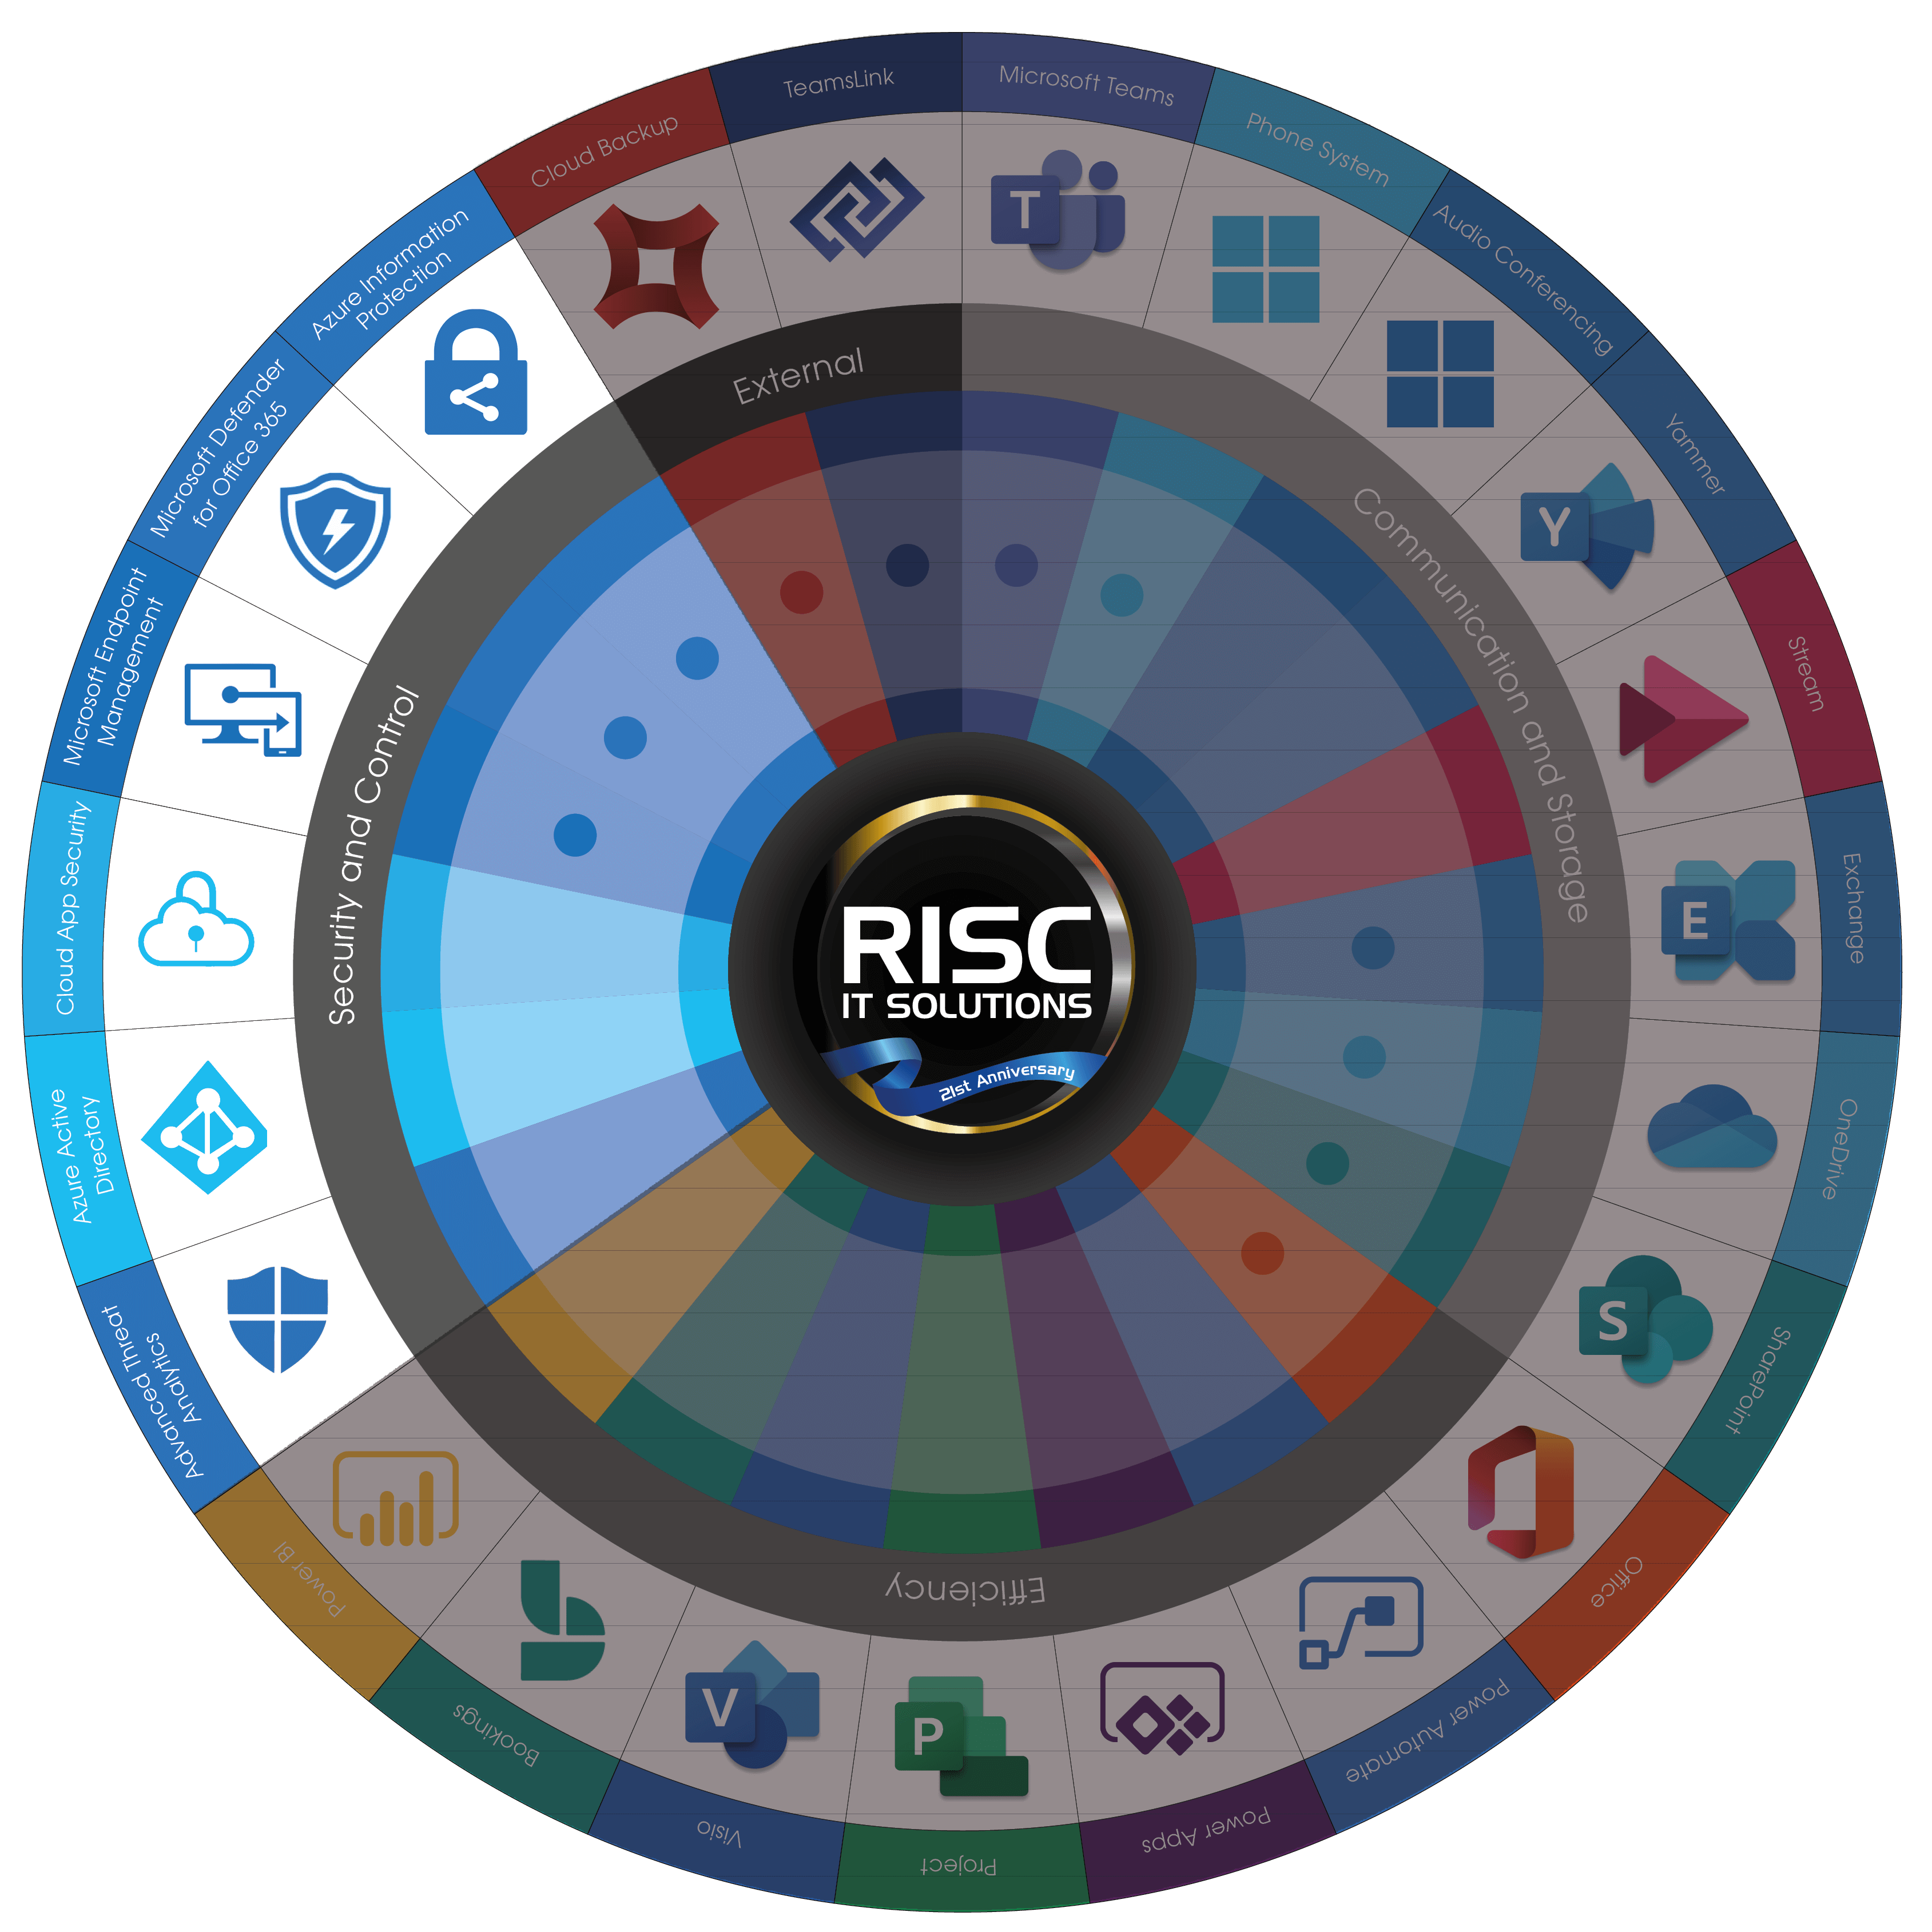 Risc IT Solutions - Microsoft 365